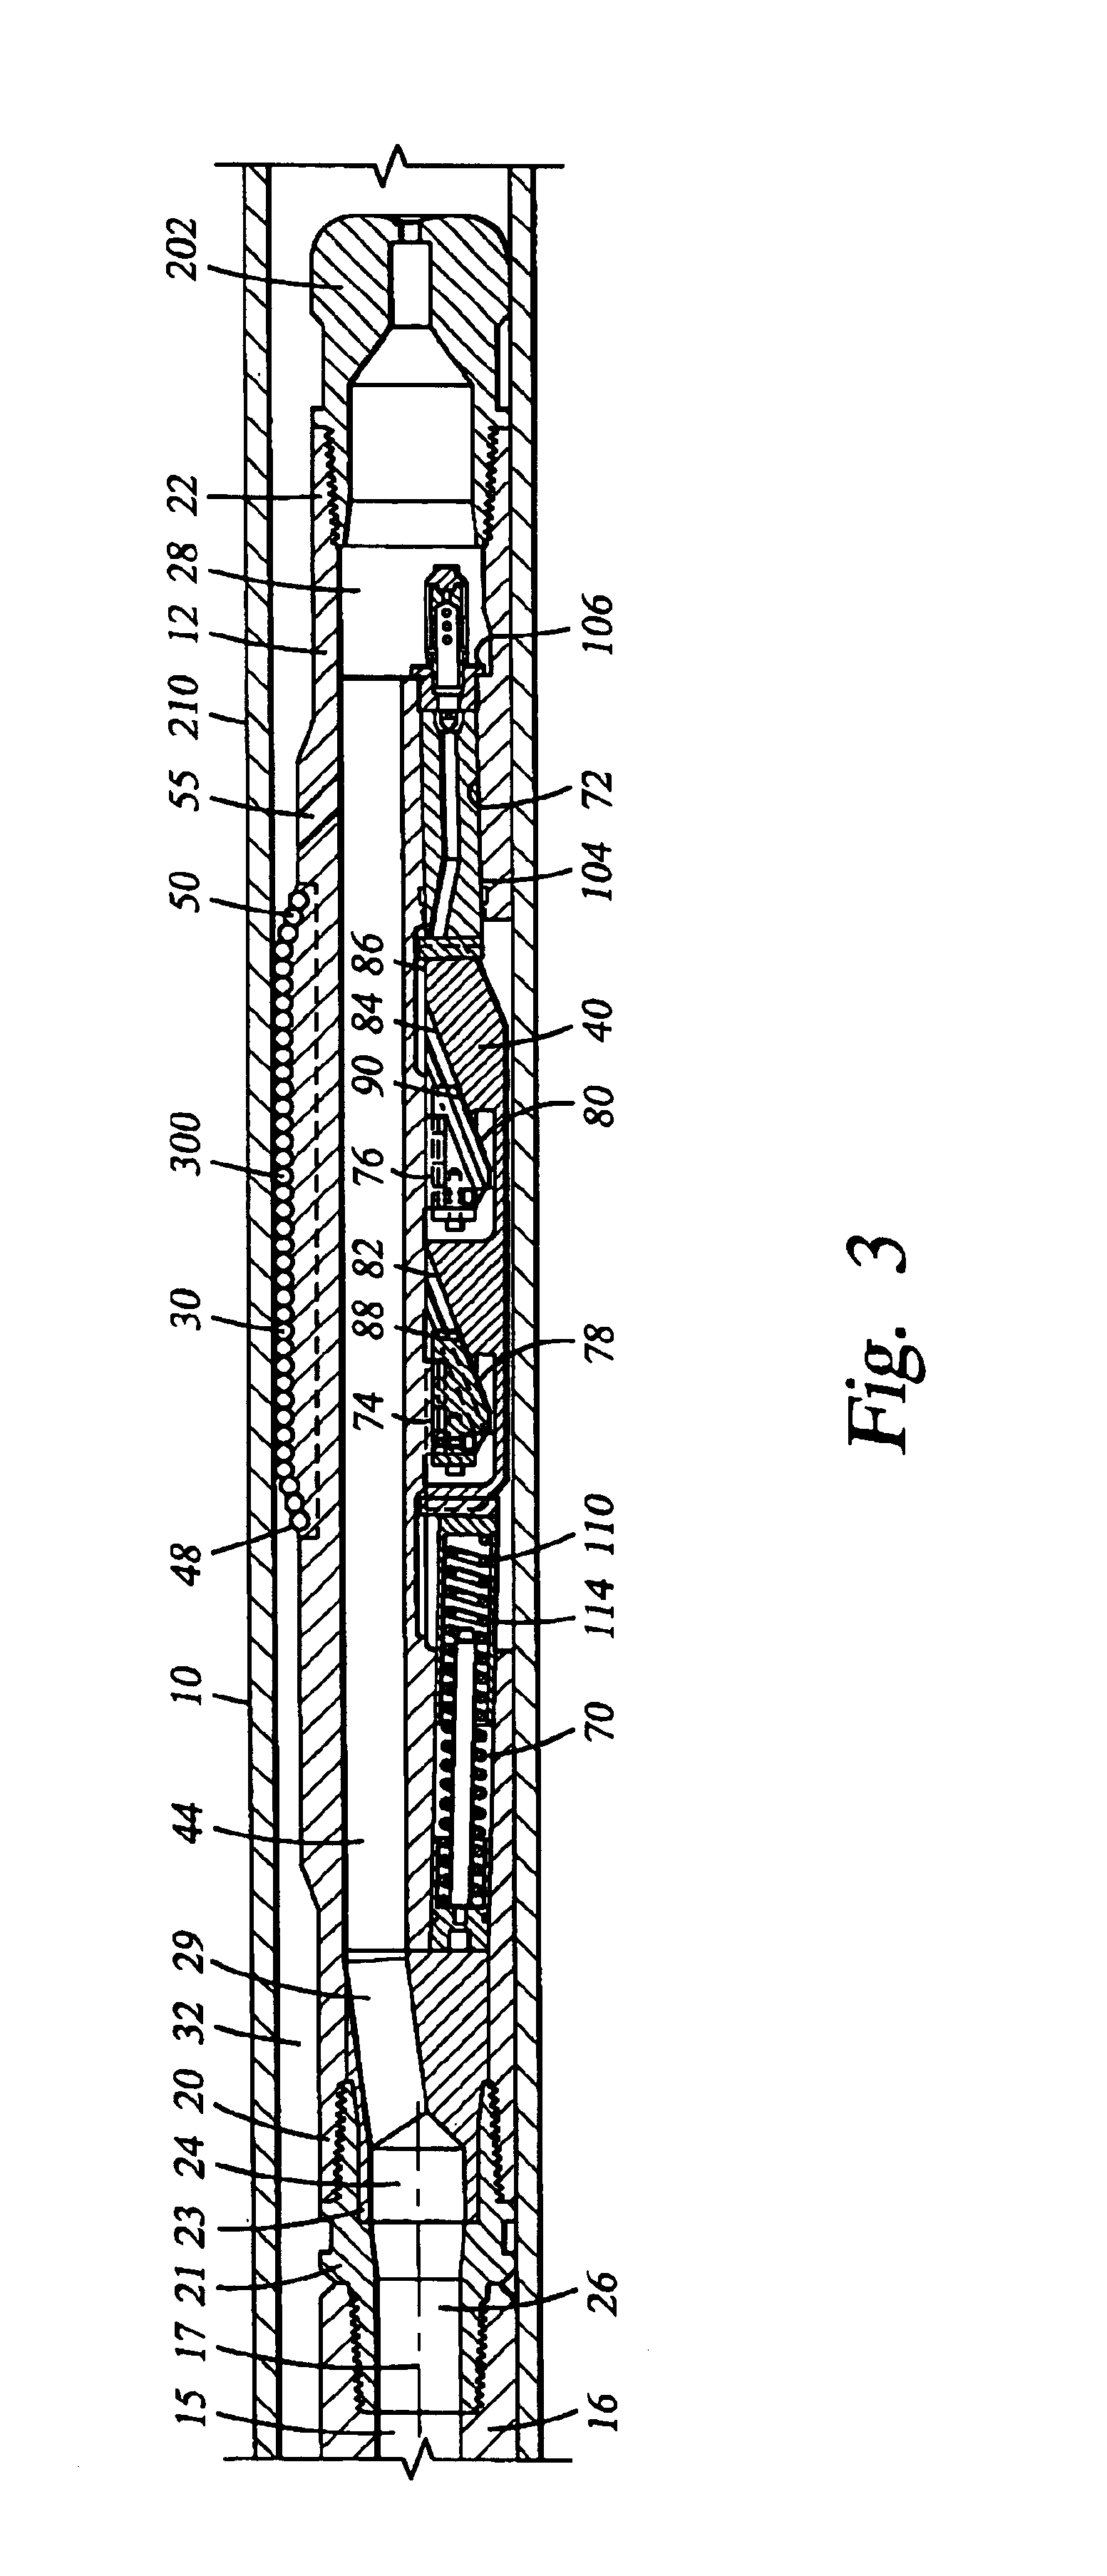 Apparatus and method for drilling and reaming a borehole